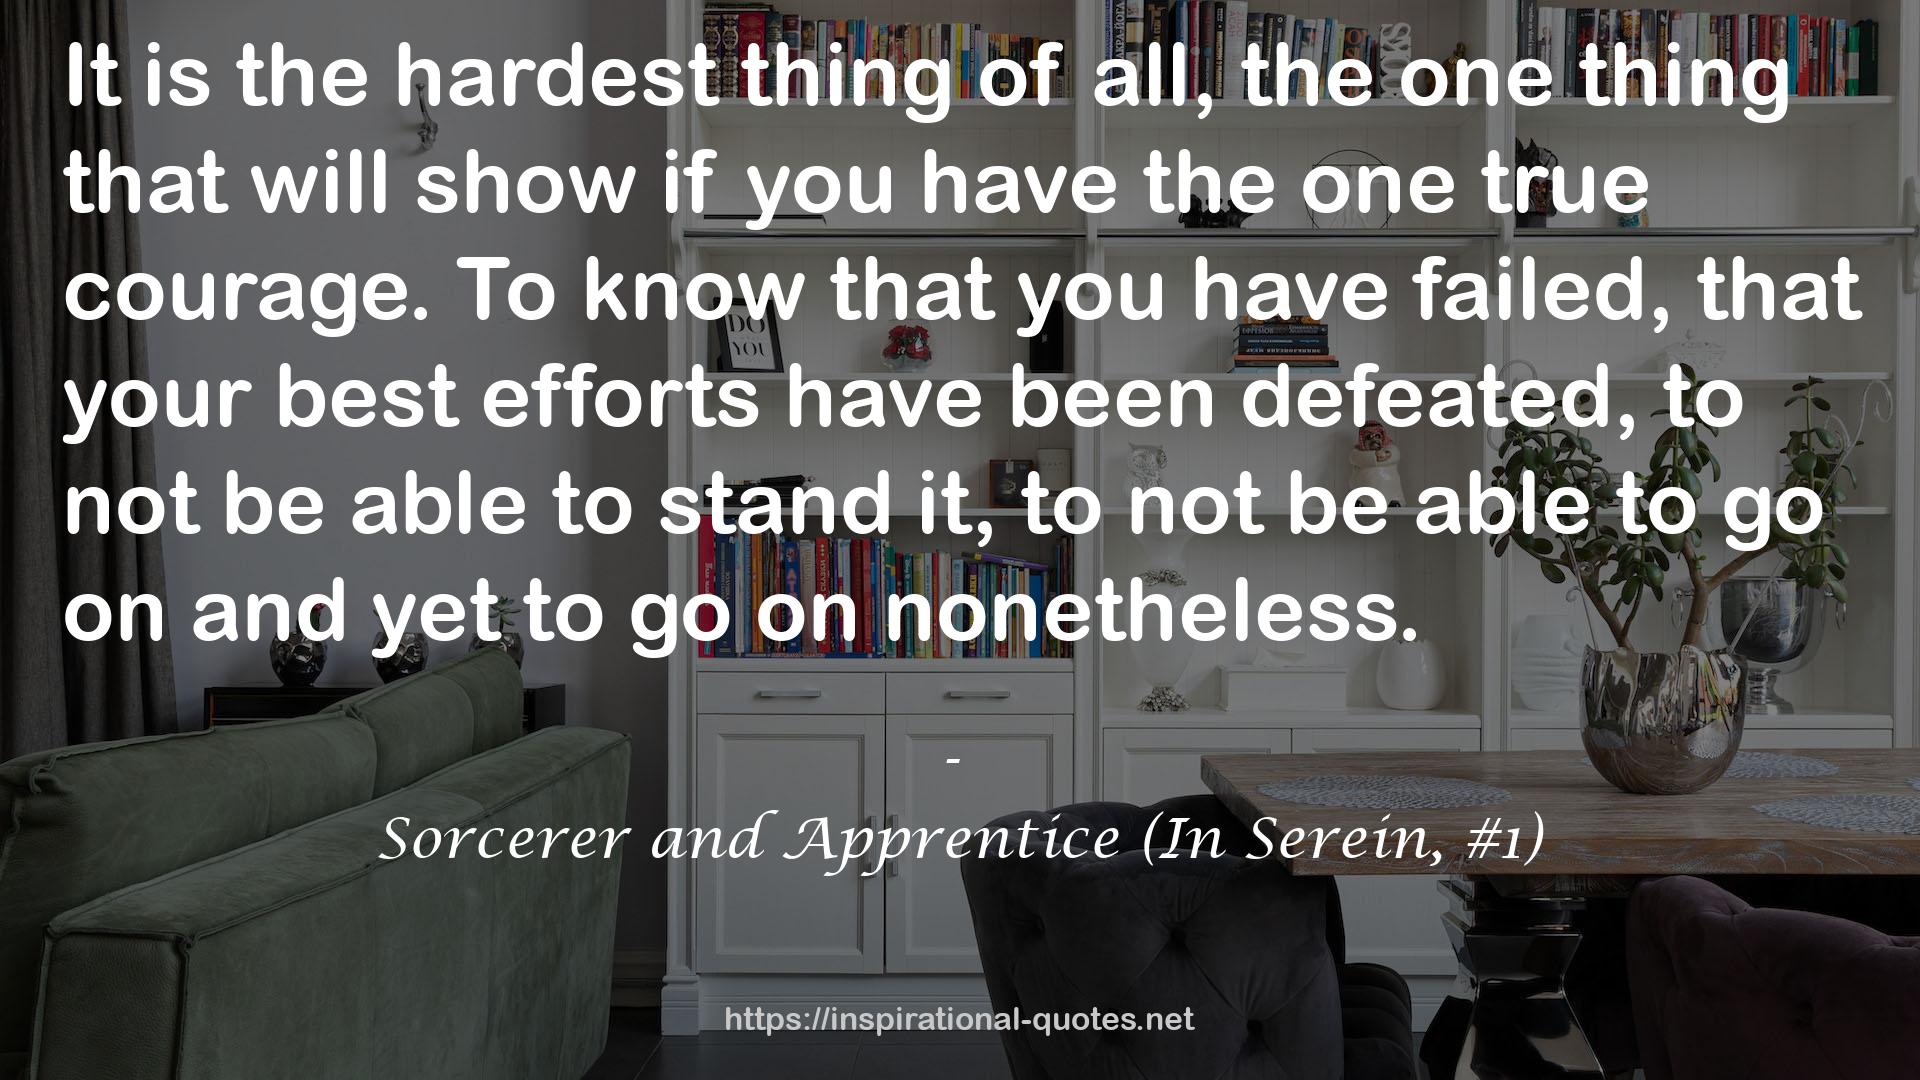 Sorcerer and Apprentice (In Serein, #1) QUOTES